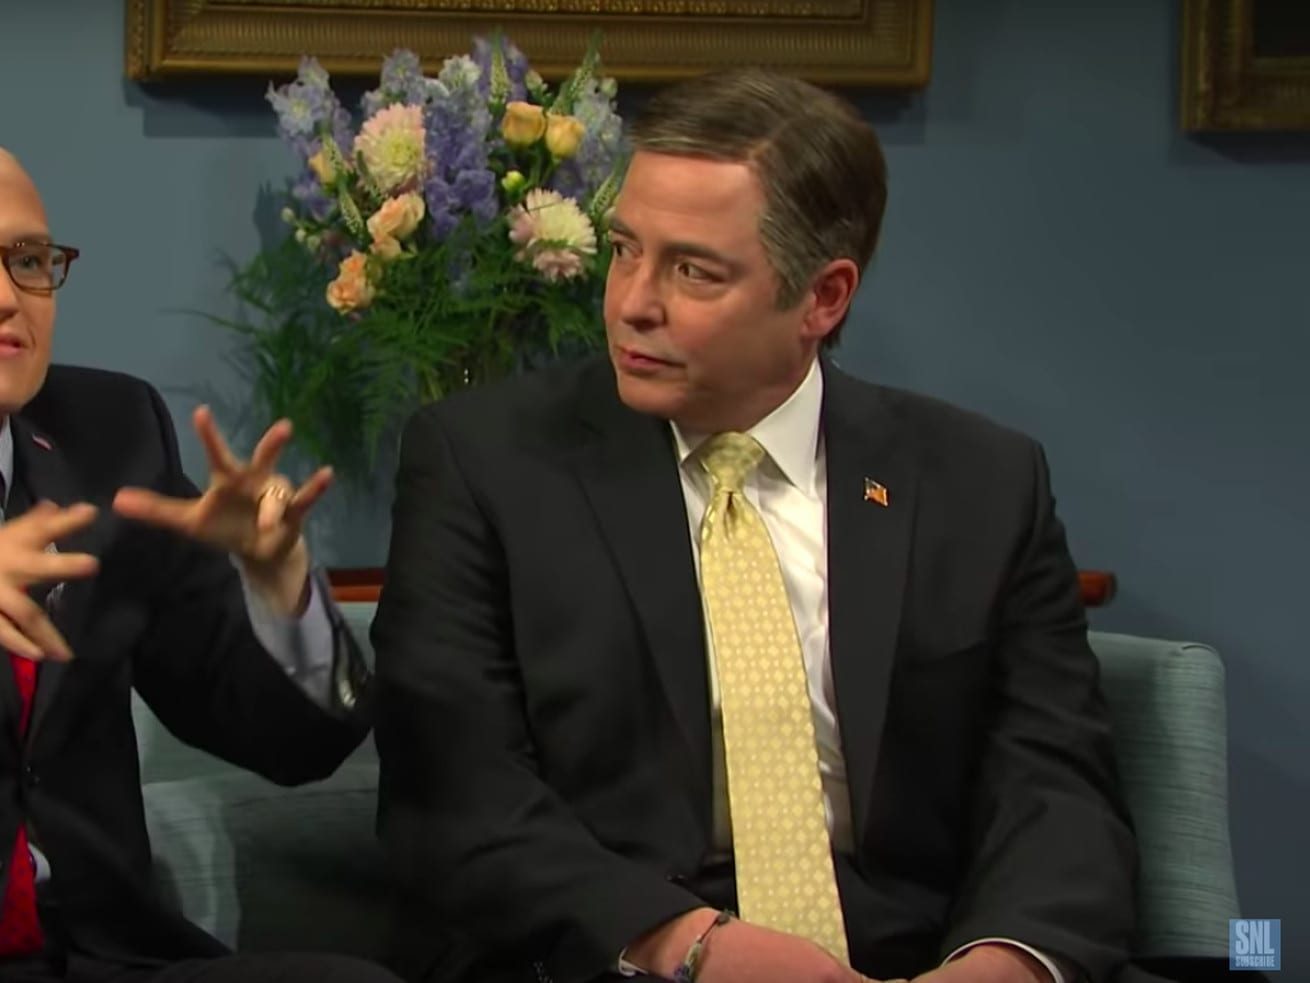 SNL cold open: Matthew Broderick plays Mike Pompeo navigating a news-heavy impeachment inquiry 